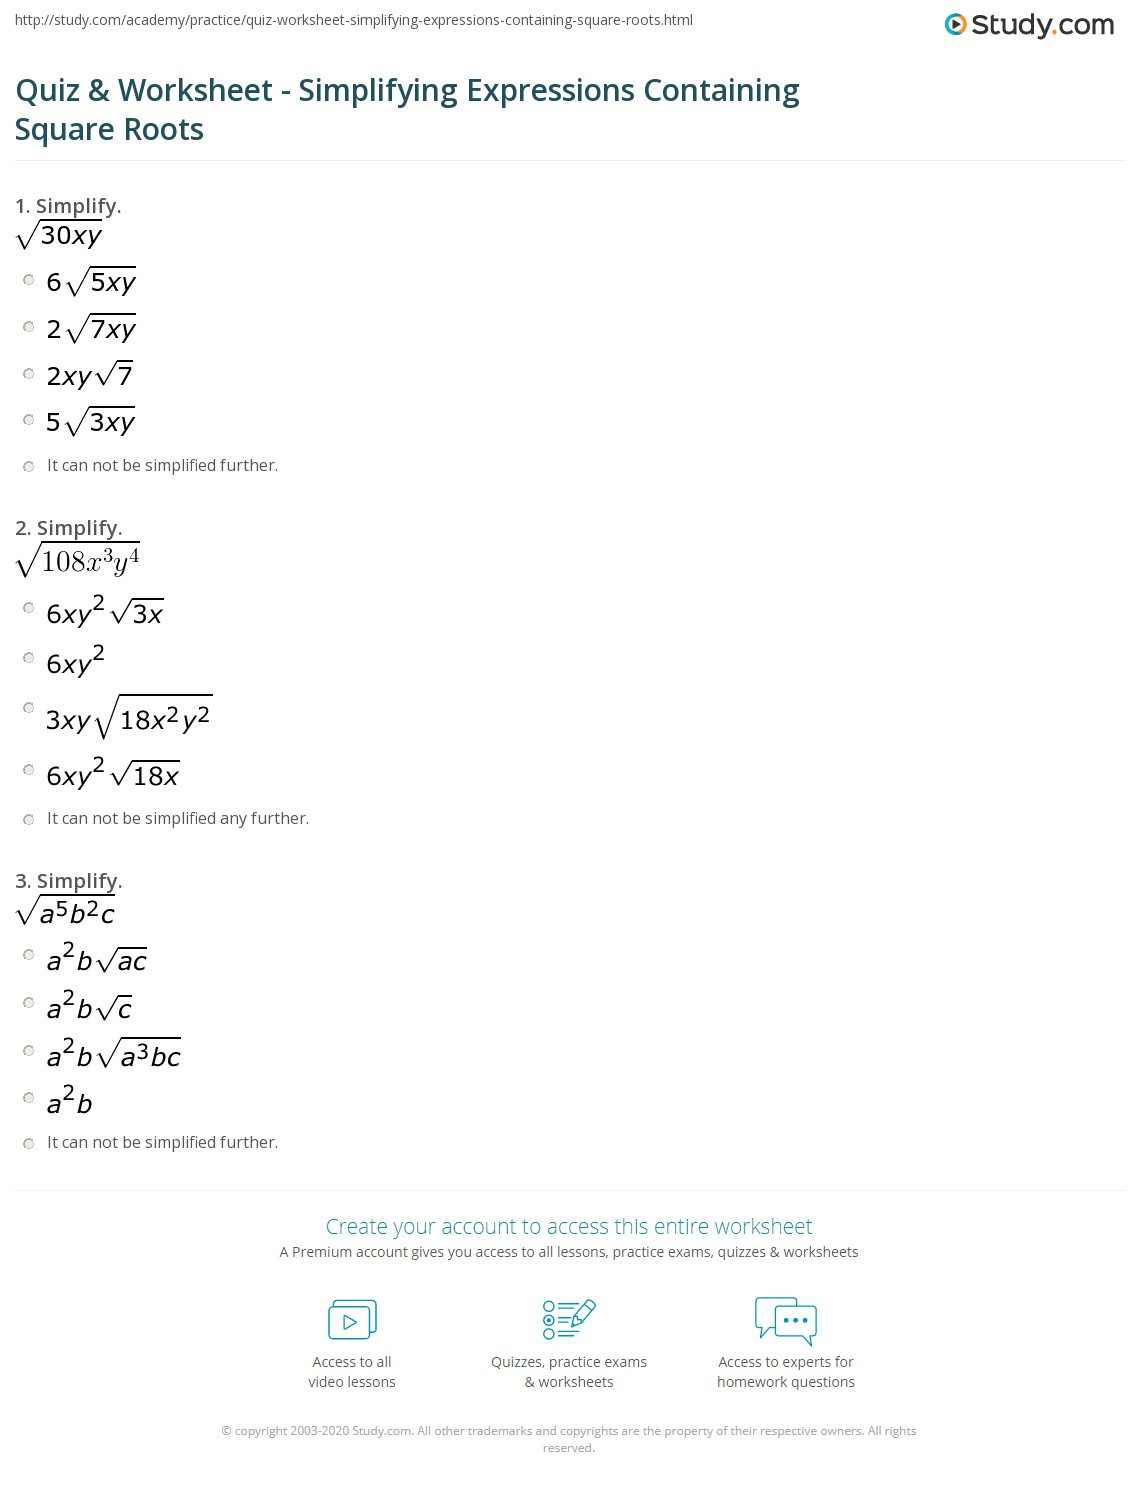 Simplify Square Root Worksheet Quiz &amp; Worksheet Simplifying Expressions Containing Square